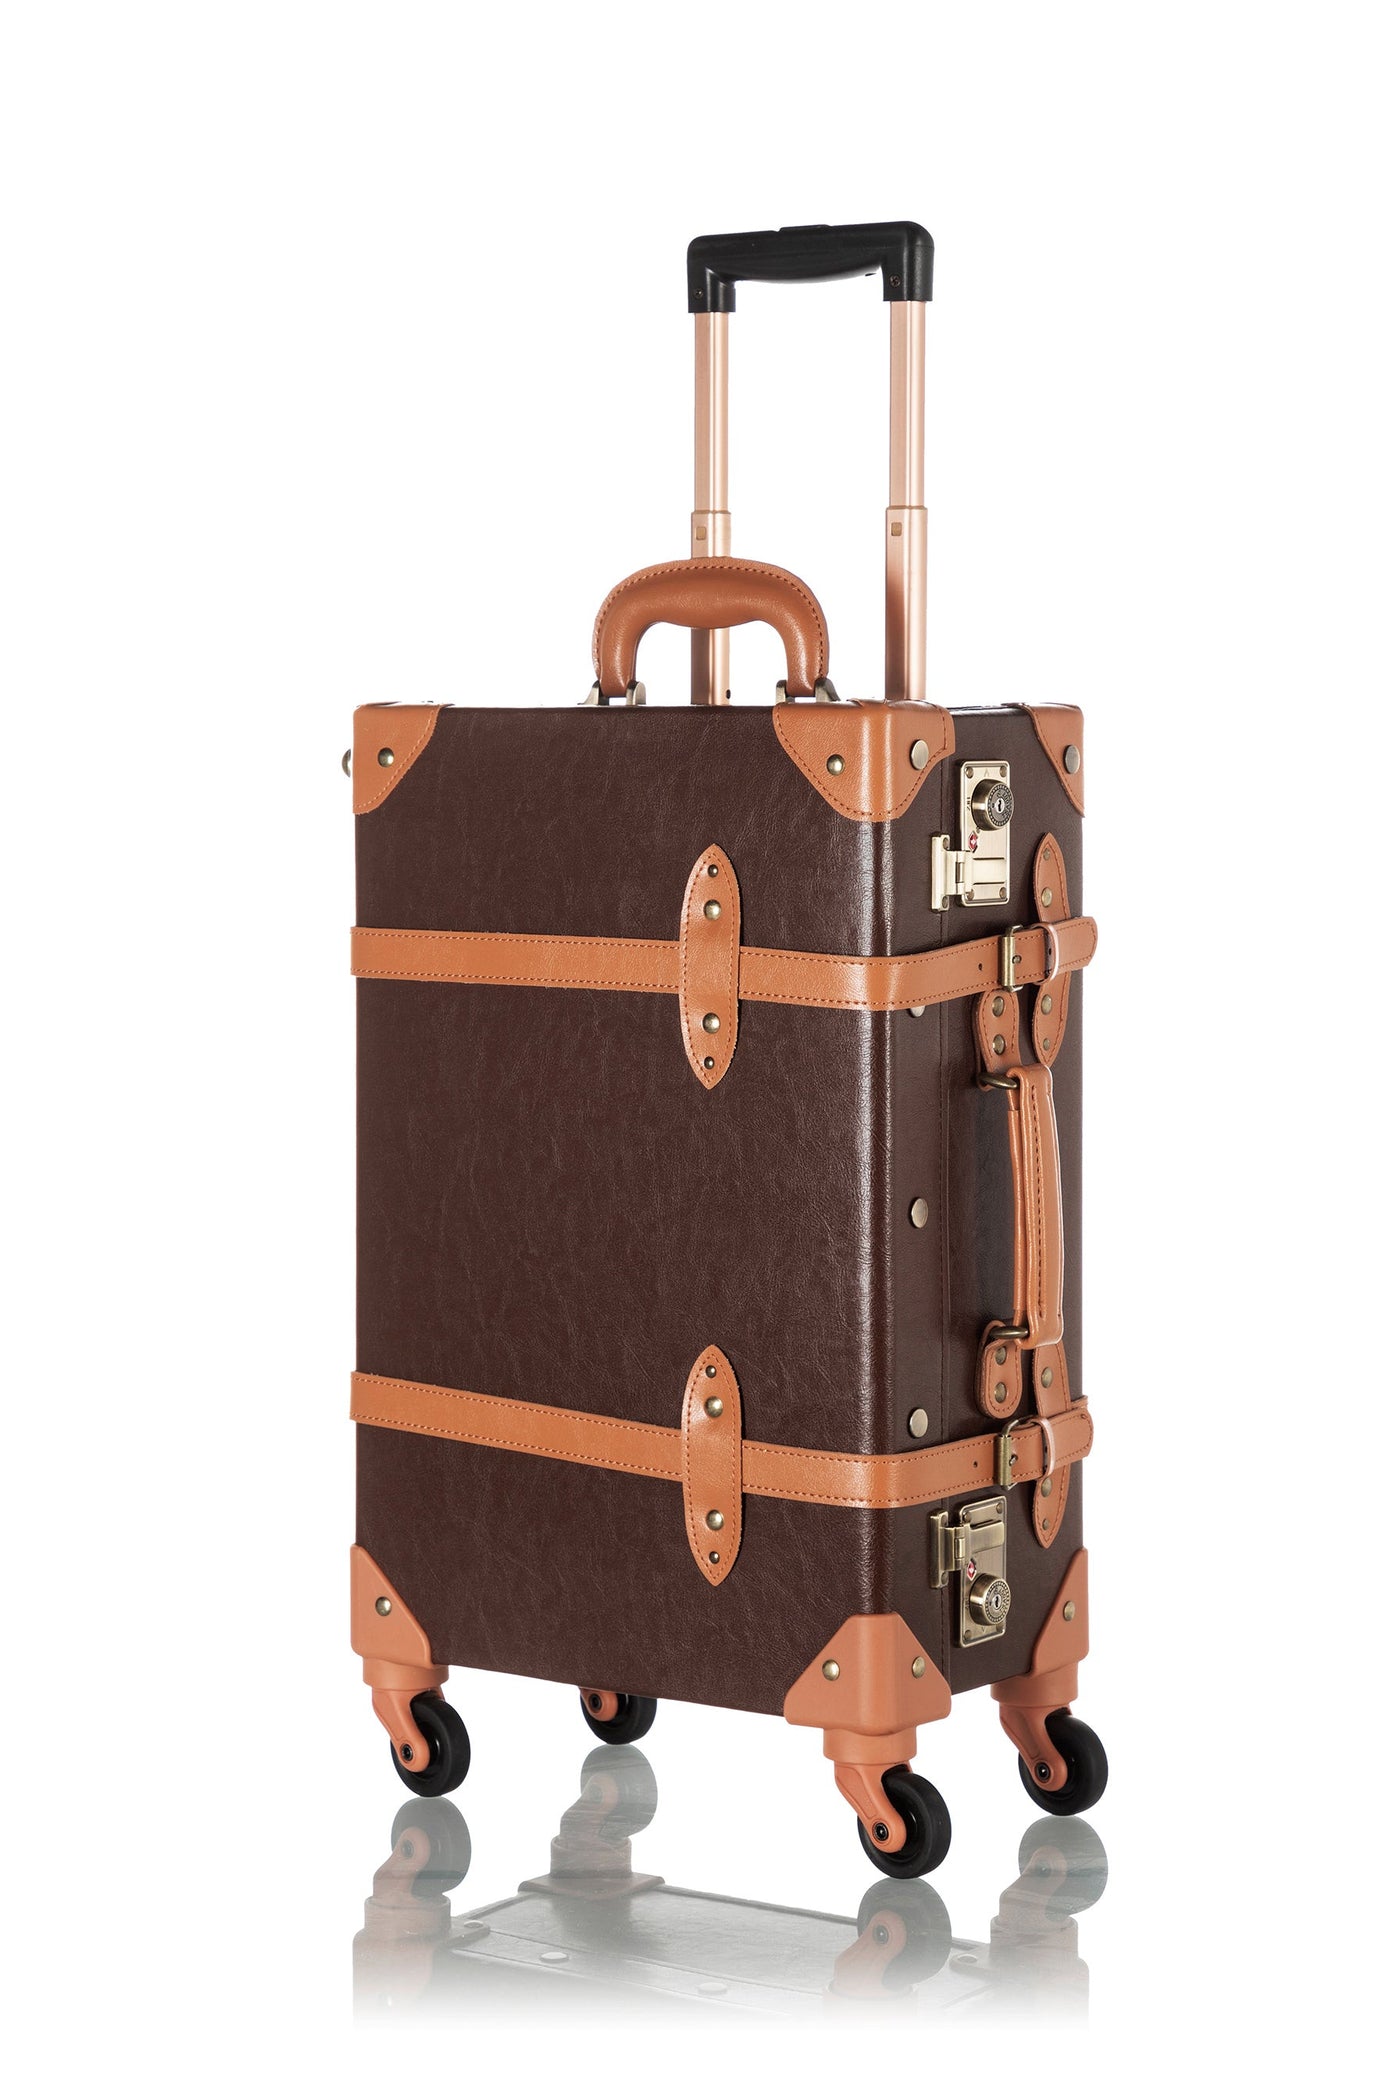 COTRUNKAGE Vintage Luggage Sets 2 Pieces TSA Lock Carry on Suitcase for Women with Spinner Wheels, Cocoa Brown, Size: 13 & 20